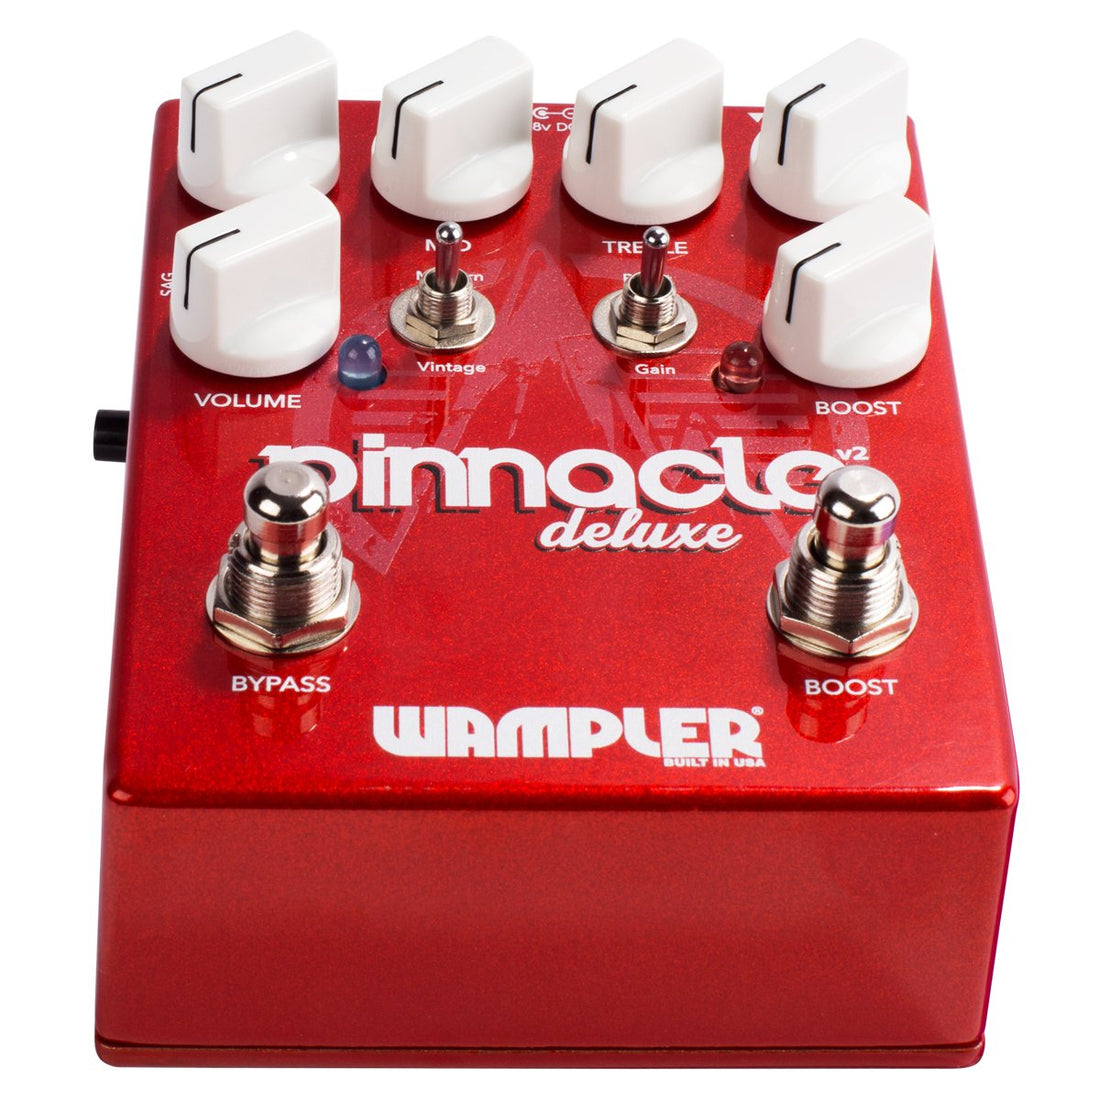 Wampler Pedals Pinnacle Deluxe V2 Distortion Effects Pedal